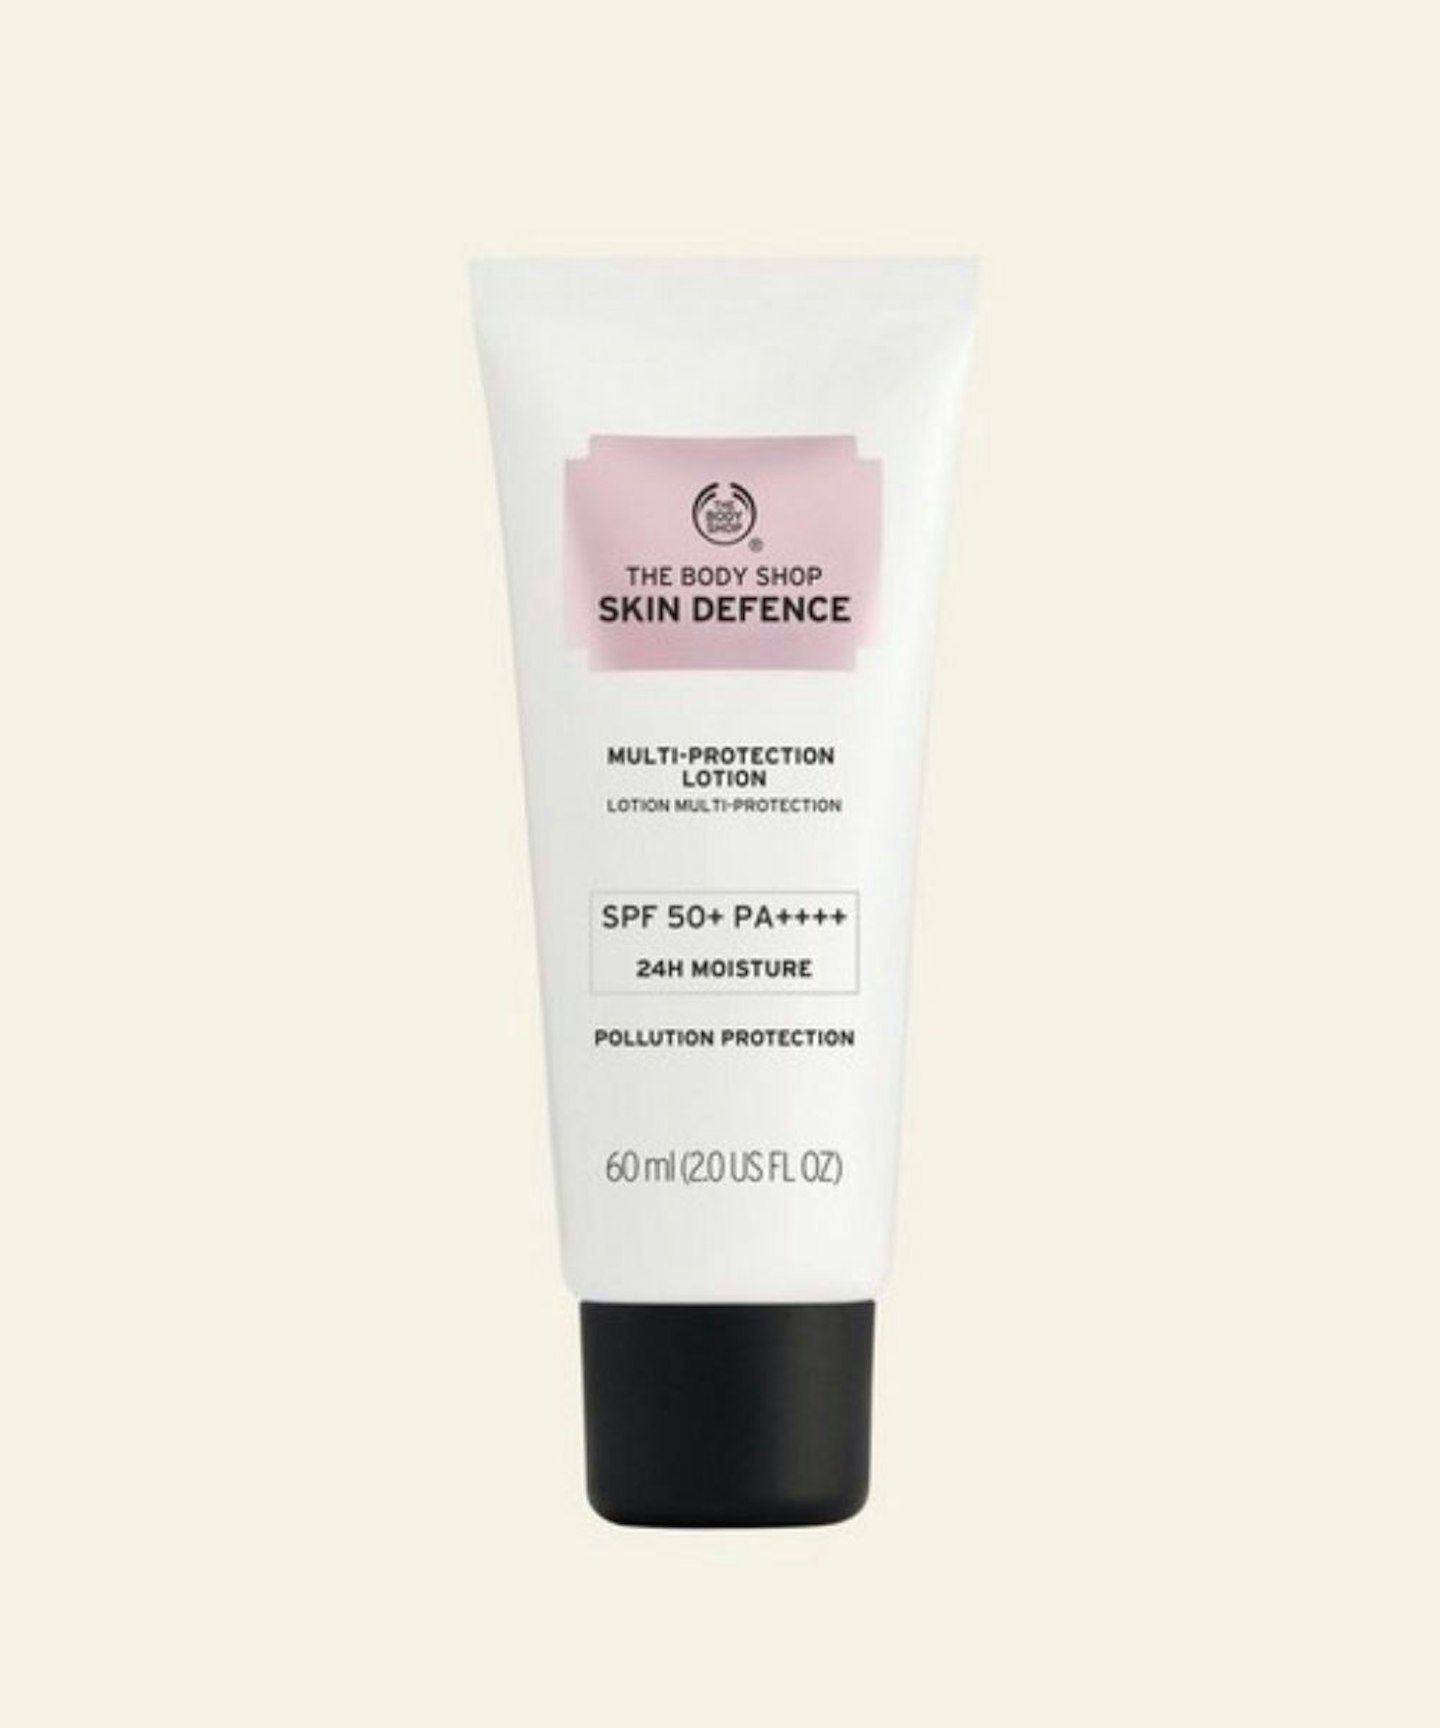 Skin Defence Multi-Protection Lotion SPF 50+